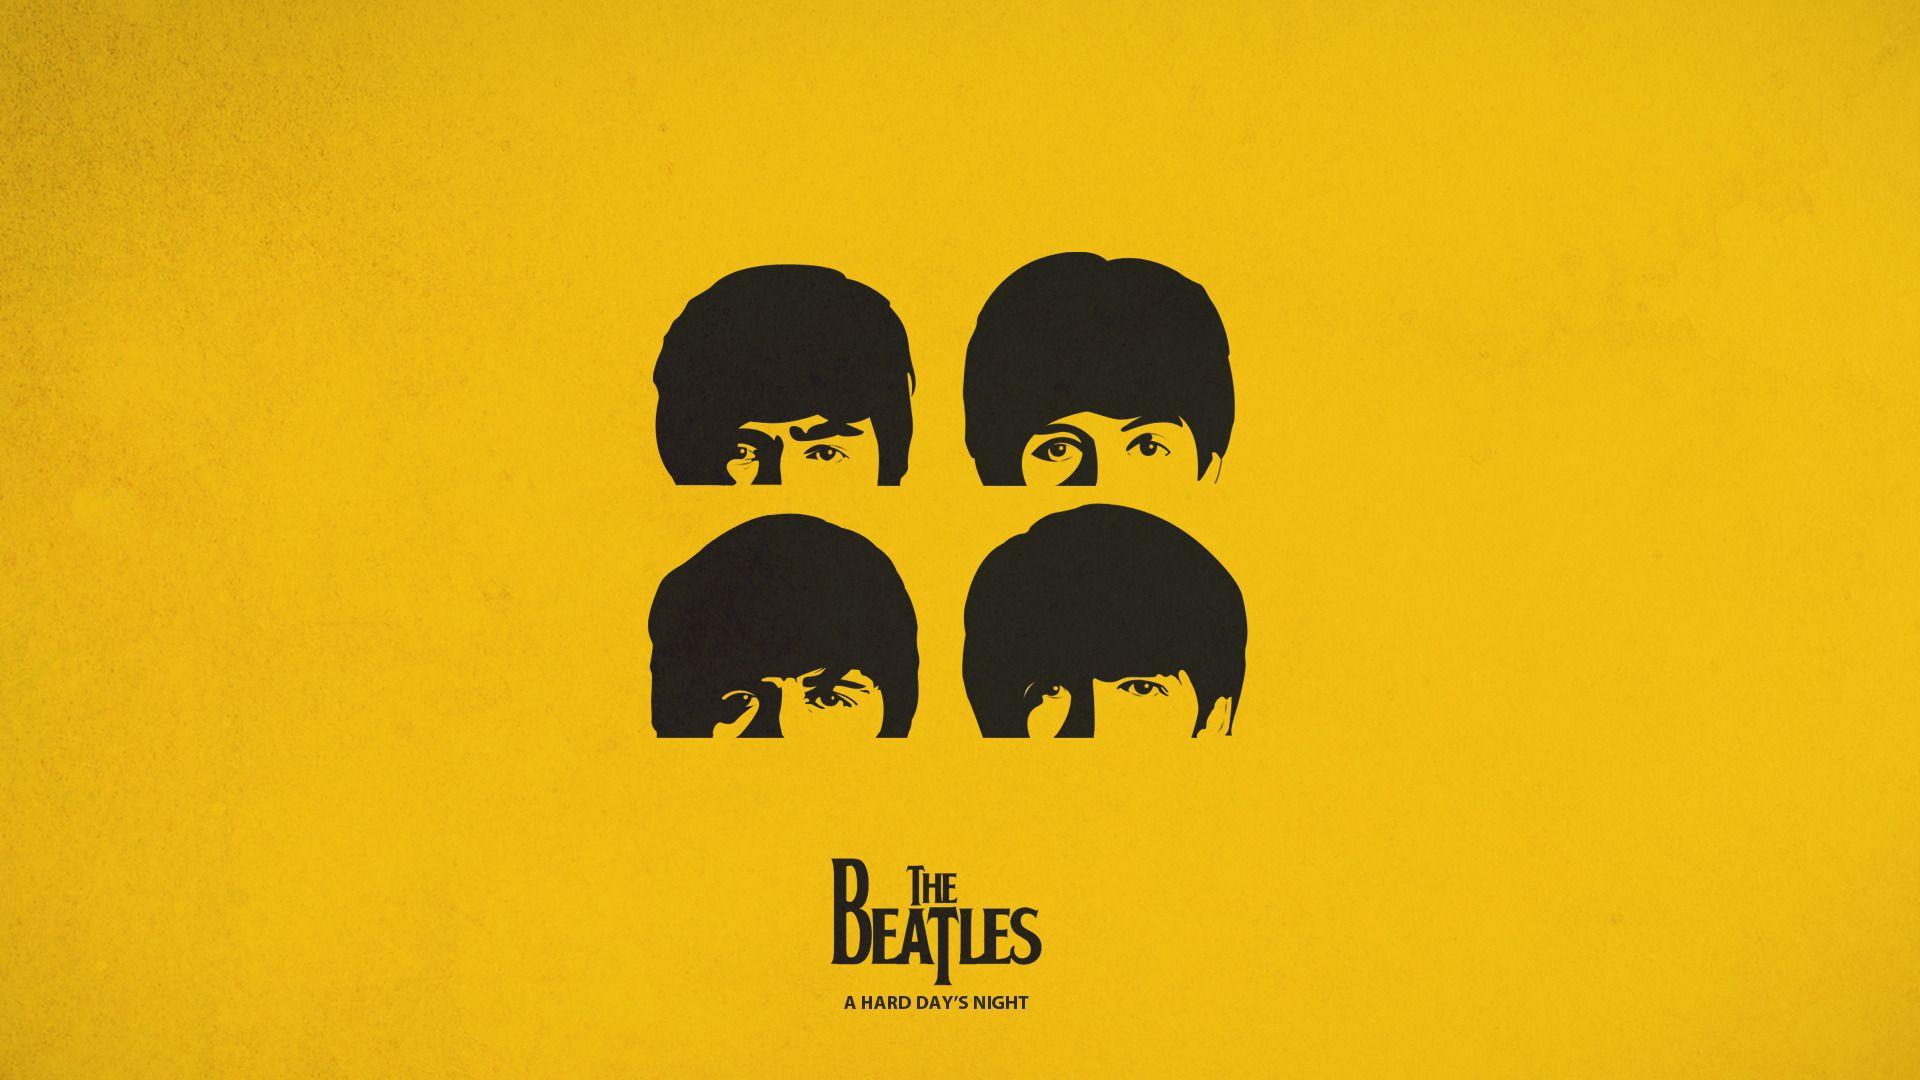 The Beatles Wallpapers Top Free The Beatles Backgrounds Wallpaperaccess